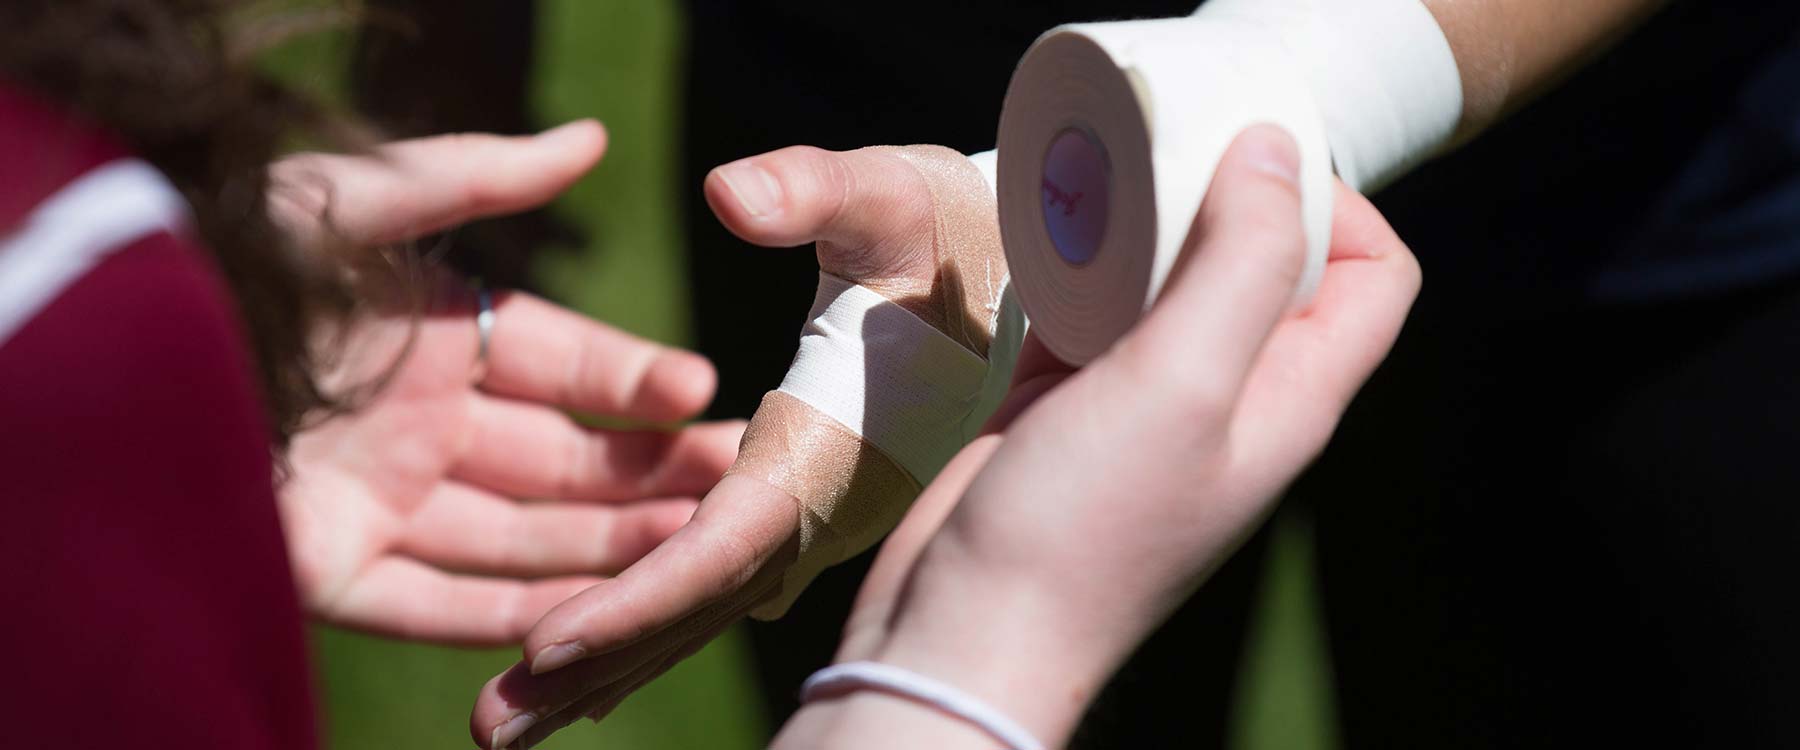 An athletic training student uses tape to wrap an athletes wrist and hand.